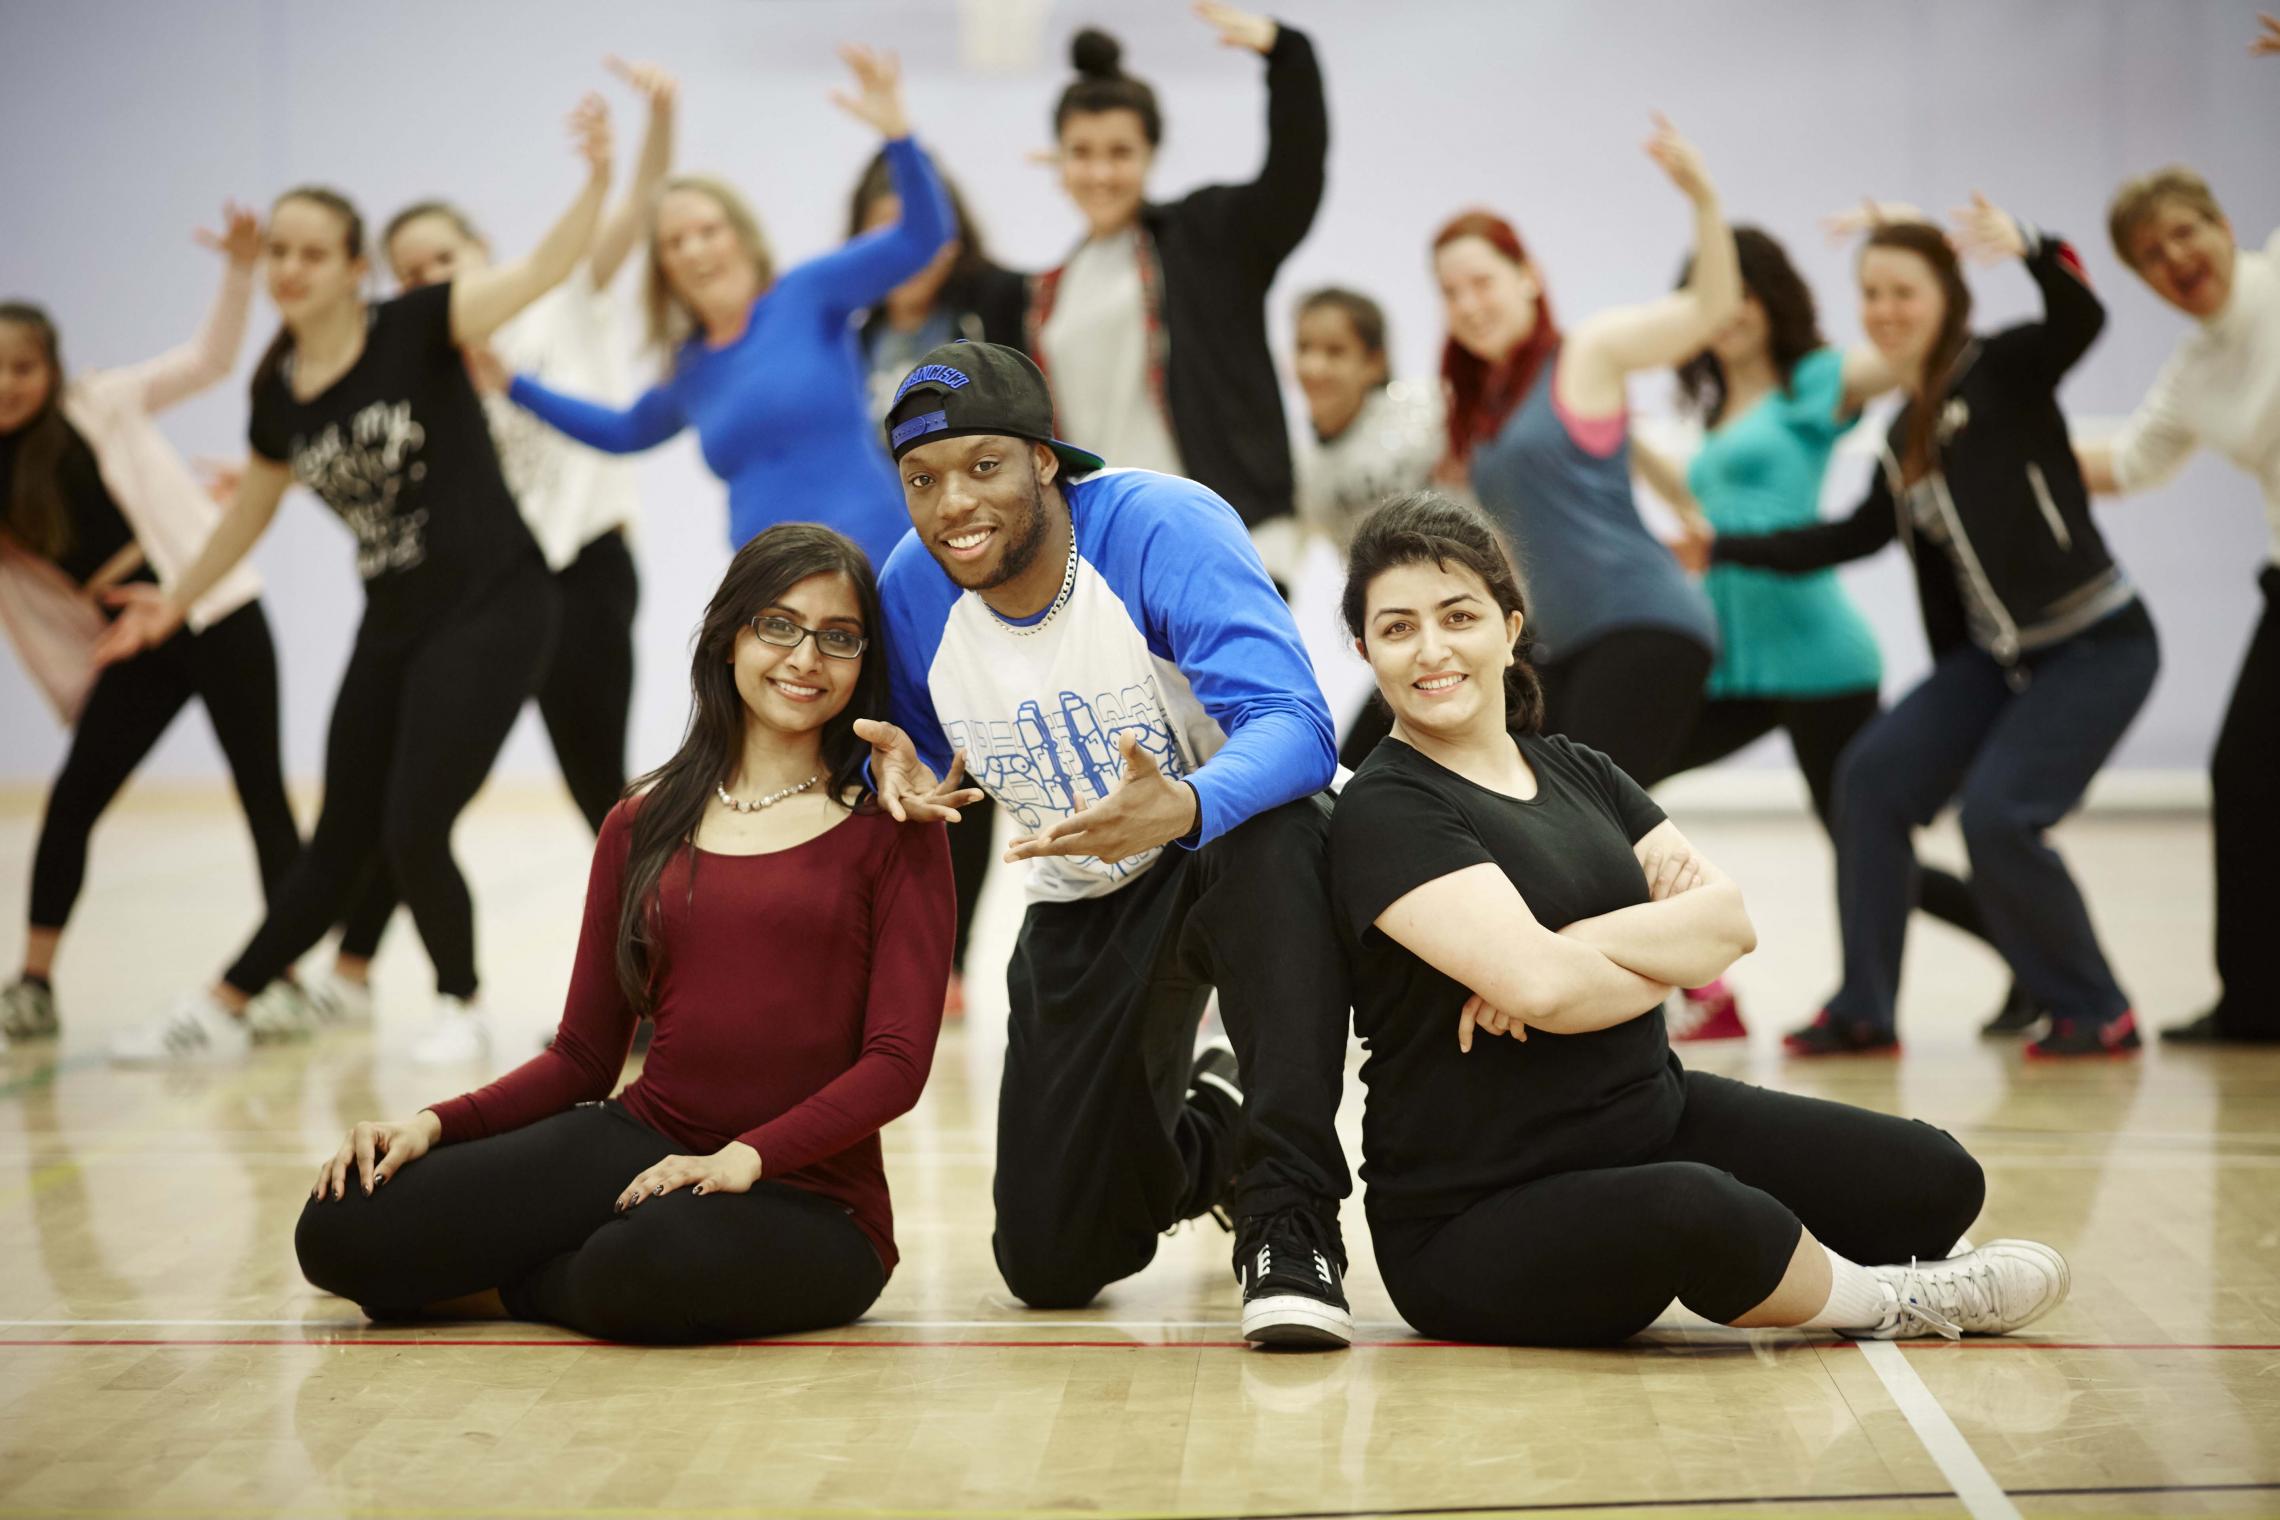 Chandni Patel (24) and Solmaz Rohani (33) from Salford with hip hop artist Syxx Issac from Blue Boy Entertainment at the taster session  at the Oasis Academy in Salford